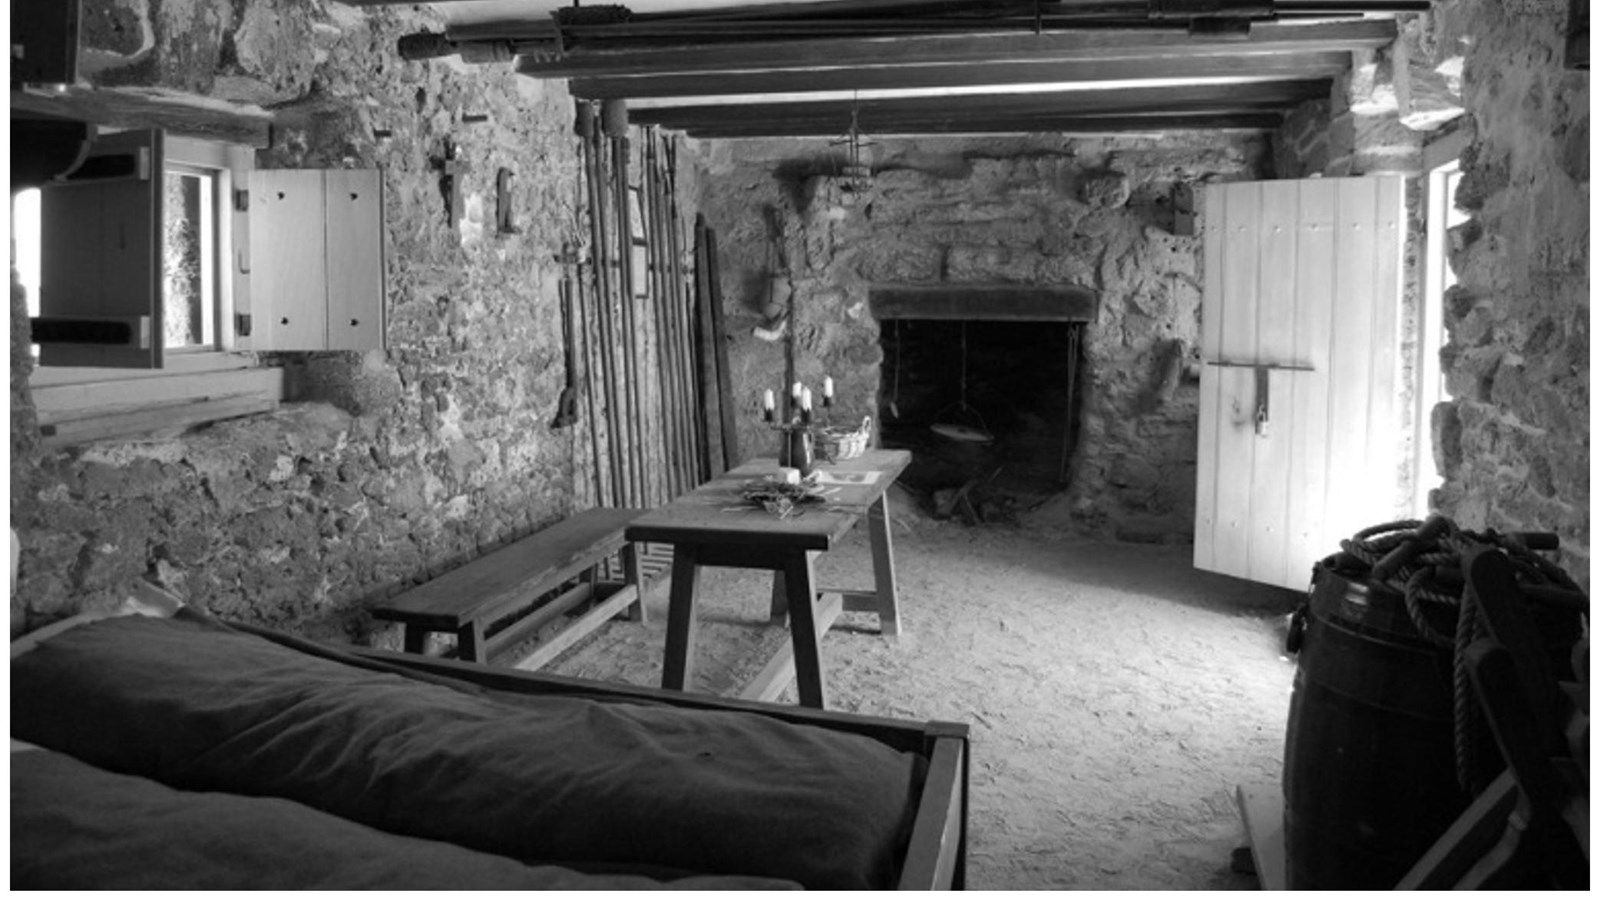 Black & white photo showing beds, fireplace, door, window, table and bench. 